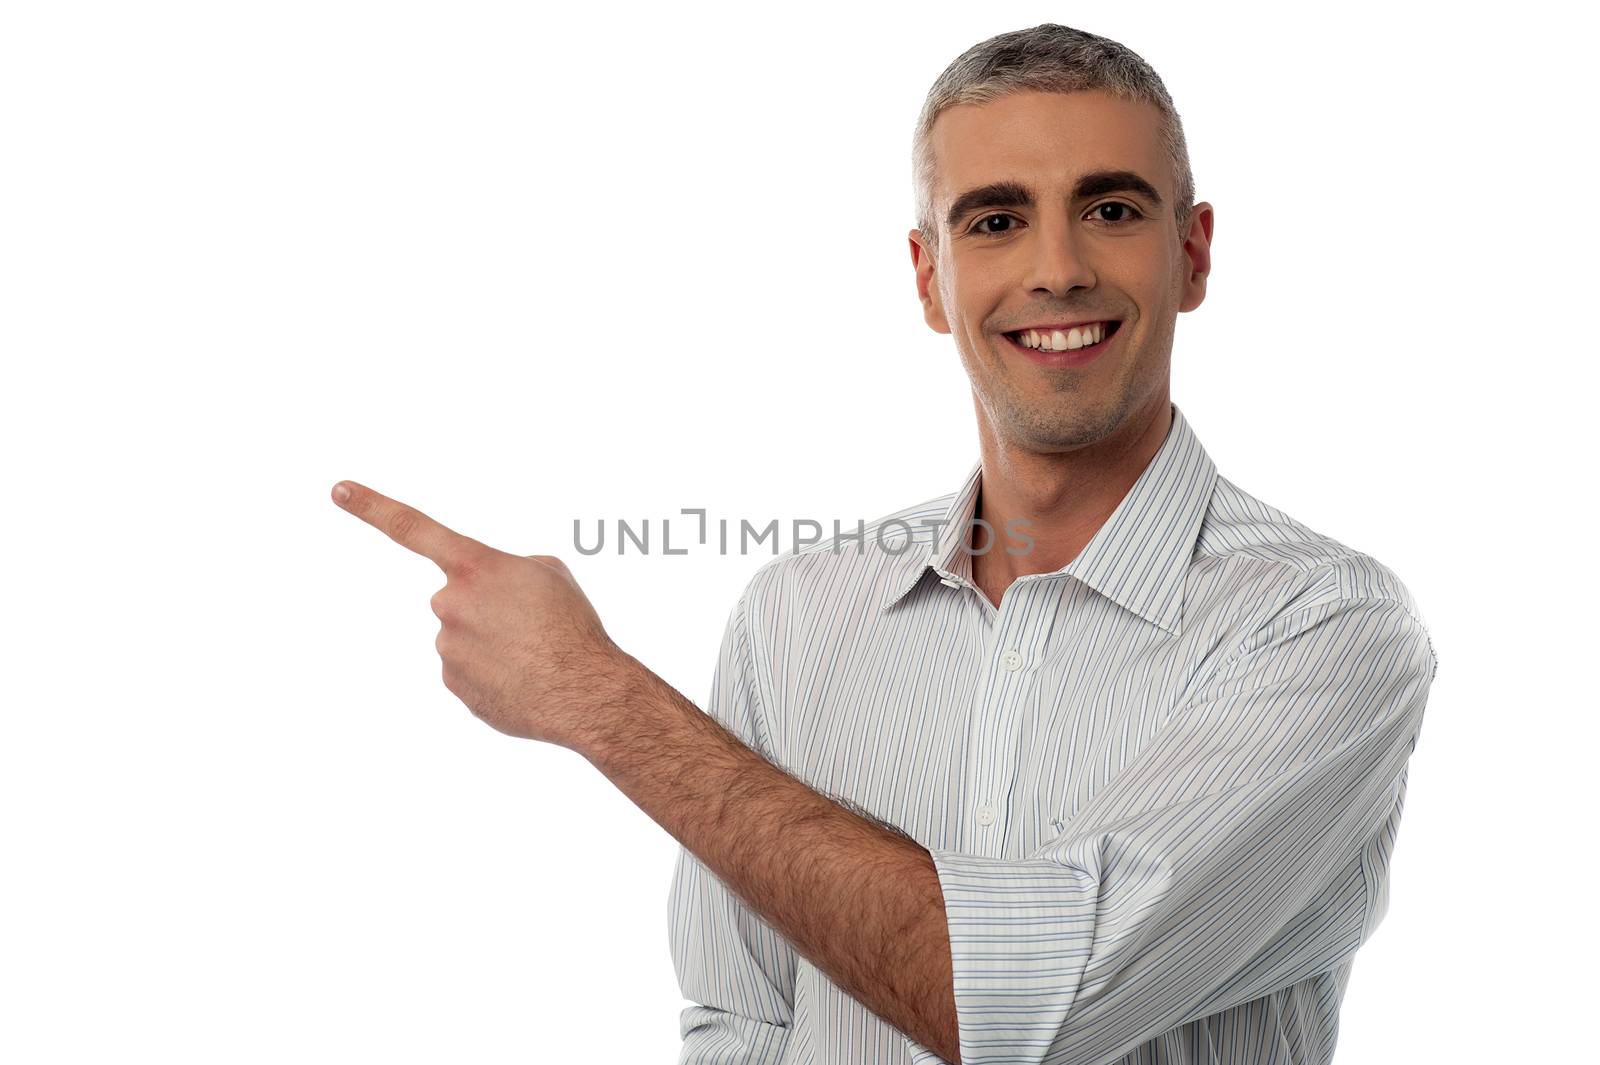 Image of a happy young man pointing to copy space